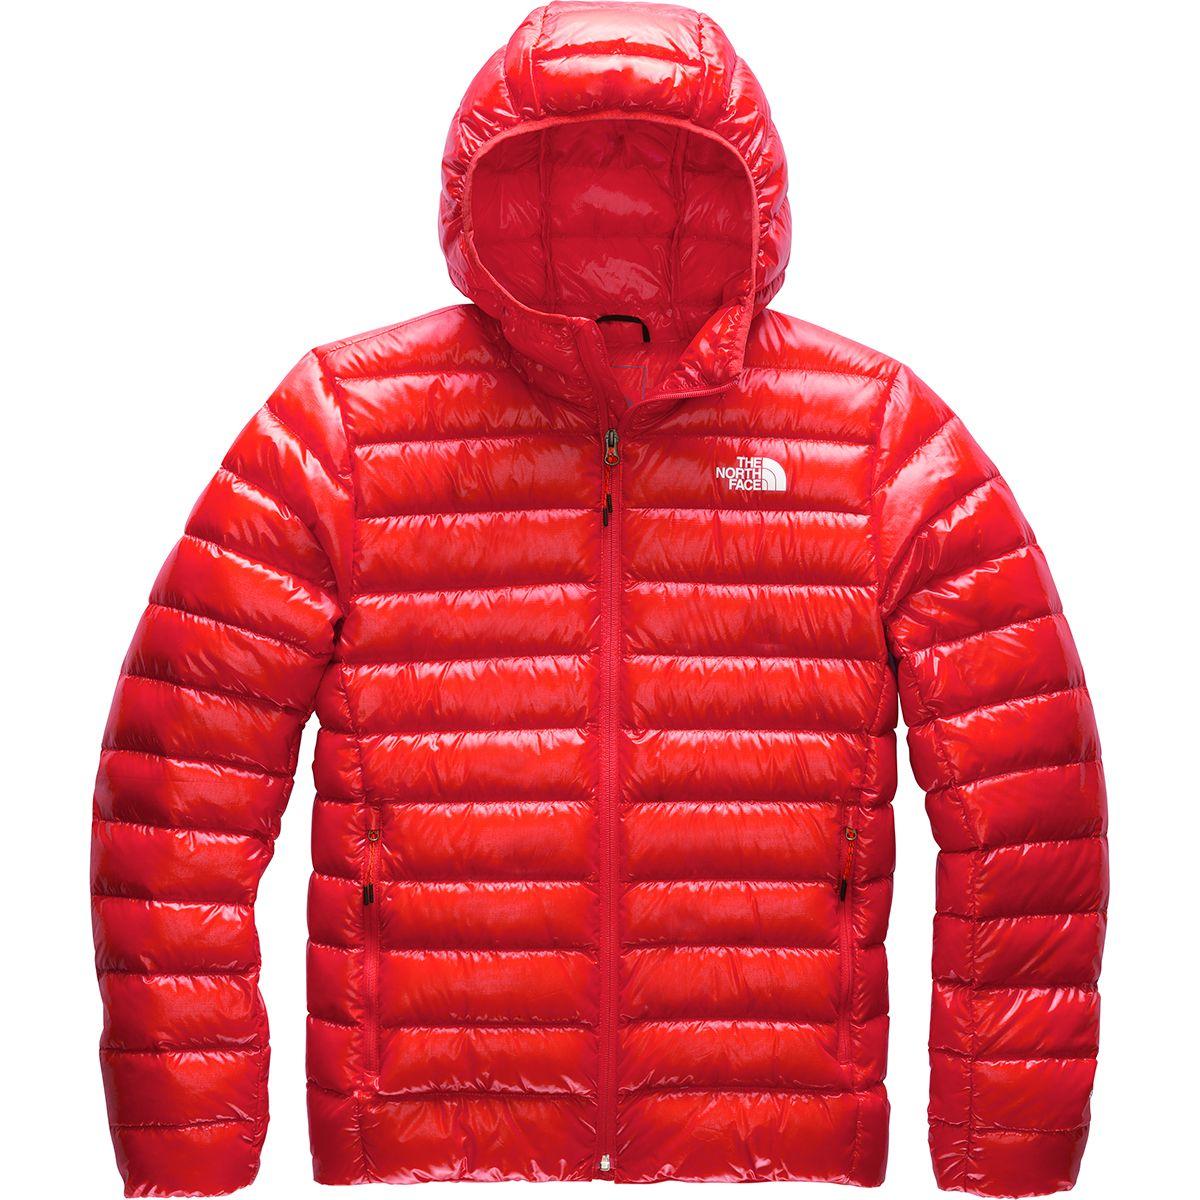 The North Face Goose Sierra Peak Down Hooded Jacket in Red for Men - Lyst